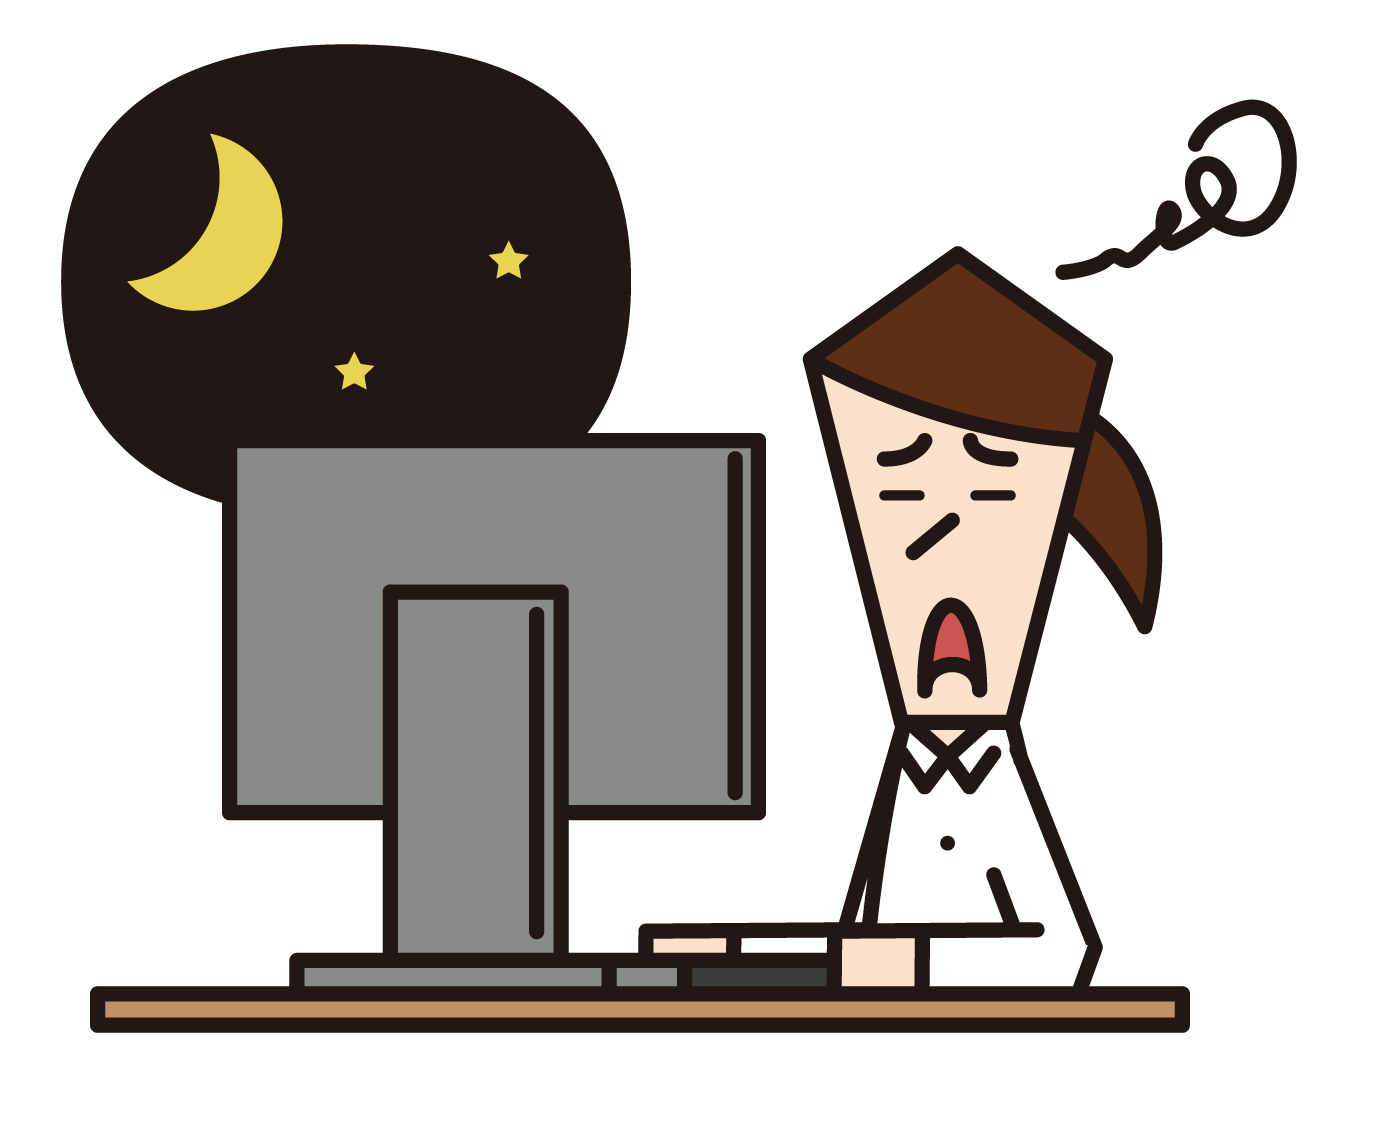 Illustration of a woman who works late at night